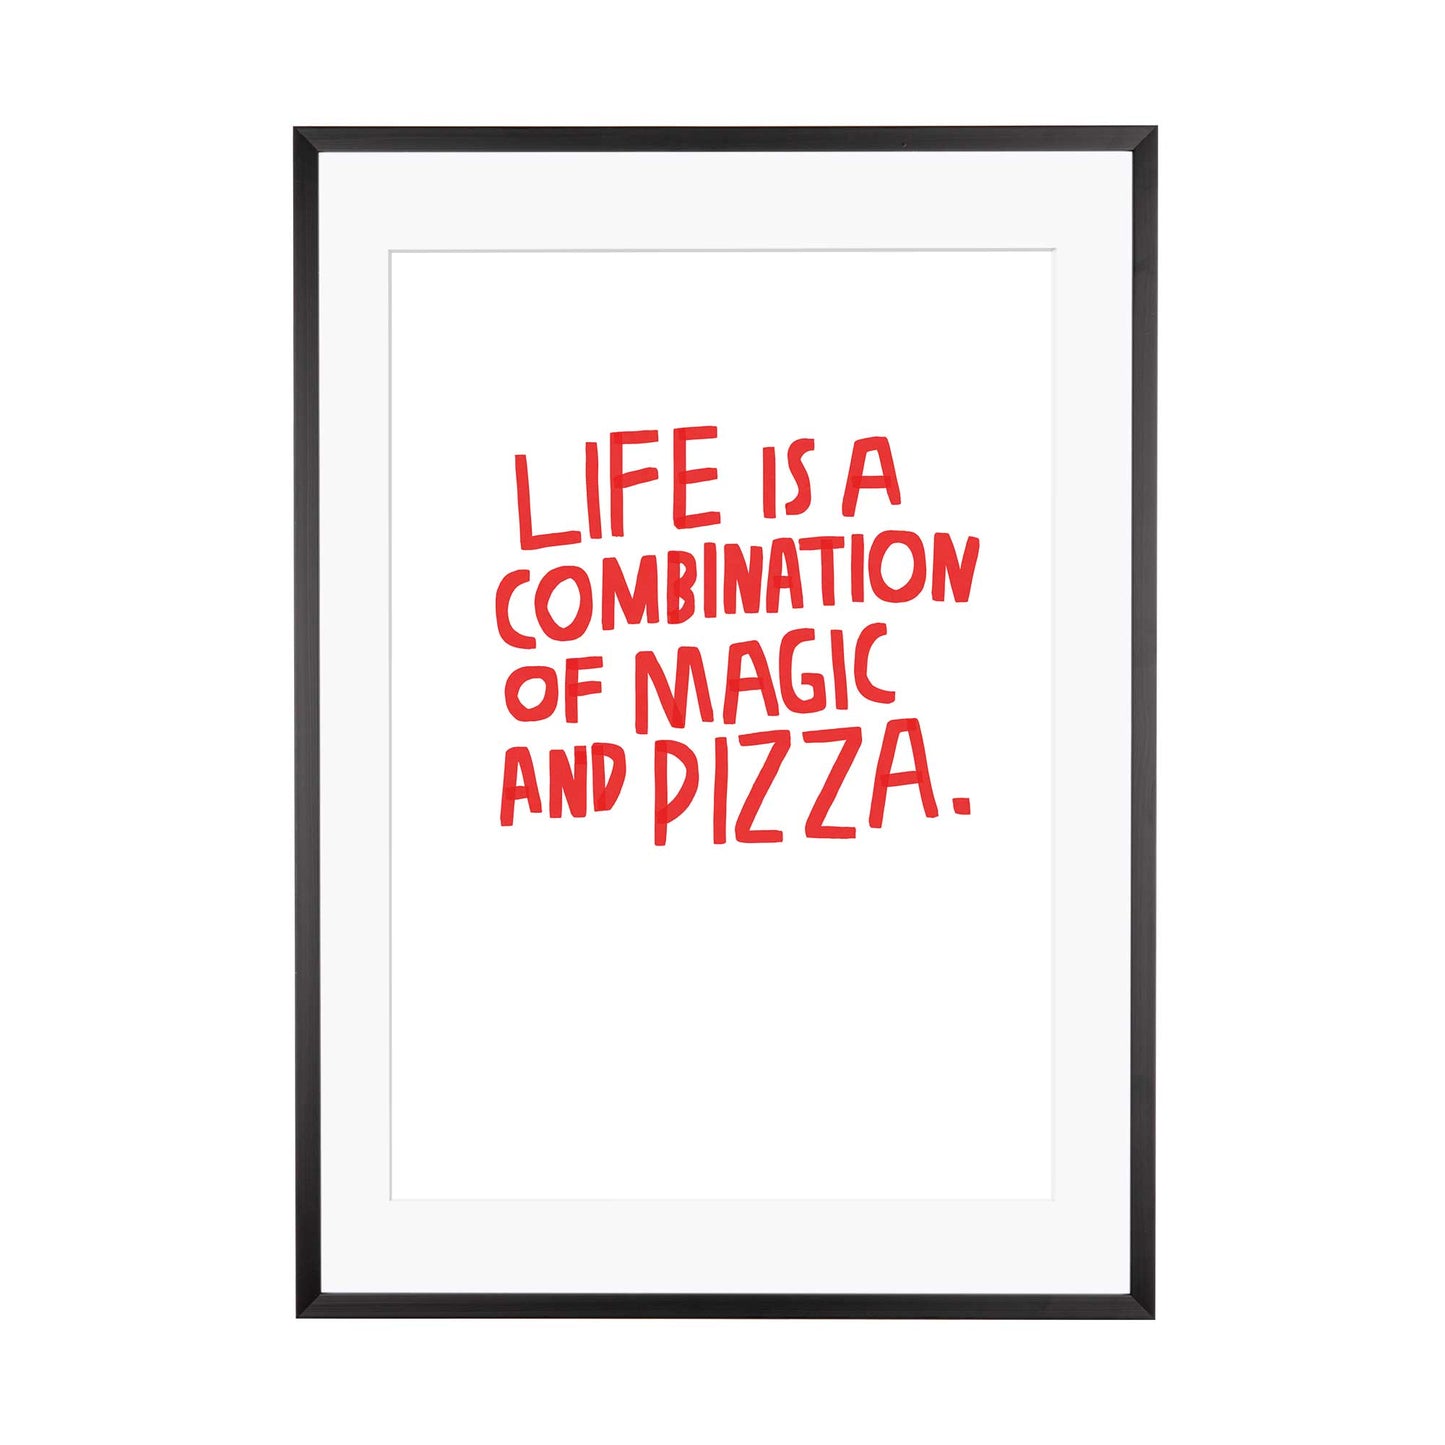 Illustration | Life is a combination of Magic and Pizza